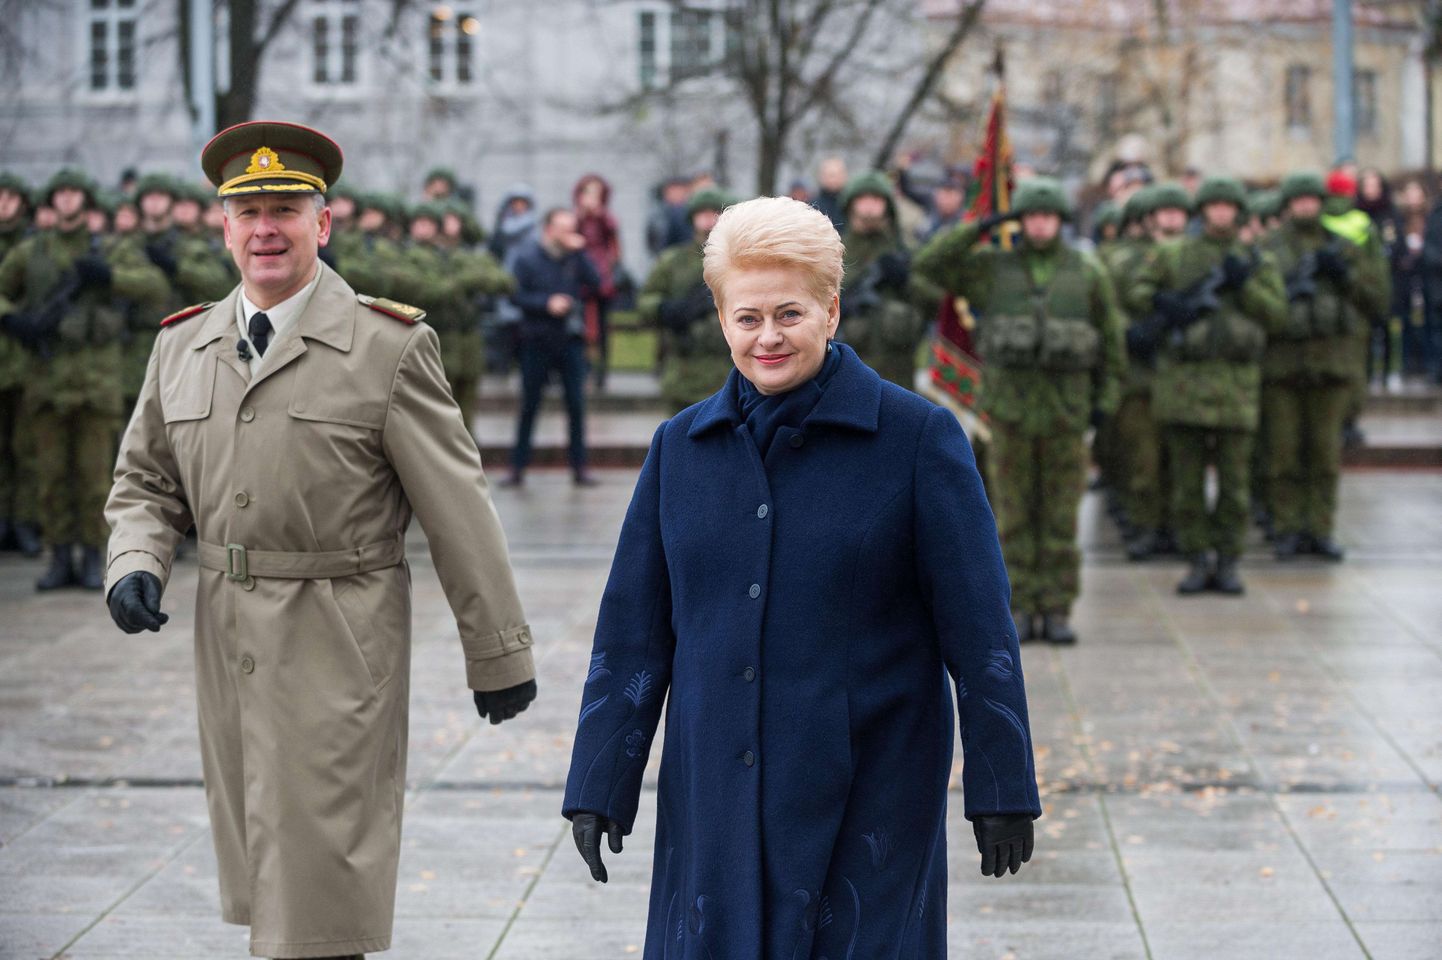 (171123) -- VILNIUS, Nov. 23, 2017 (Xinhua) -- Lithuanian President Dalia Grybauskaite (R) reviews the troops during the Lithuania's Armed Forces Day celebration in Vilnius, capital of Lithuania, on Nov. 23, 2017. Lithuanian armed forces and troops of some NATO member countries and Ukraine held a gala with formation on Nov. 23 to celebrate Lithuania's Armed Forces Day. The first decree on establishing armed forces was approved on Nov. 23, 1918, which became the Armed Forces Day of the Baltic country. (Xinhua/Alfredas Pliadis)(jmmn) - Alfredas Pliadis -//CHINENOUVELLE_chinenouvelle16591/Credit:CHINE NOUVELLE/SIPA/1711231620